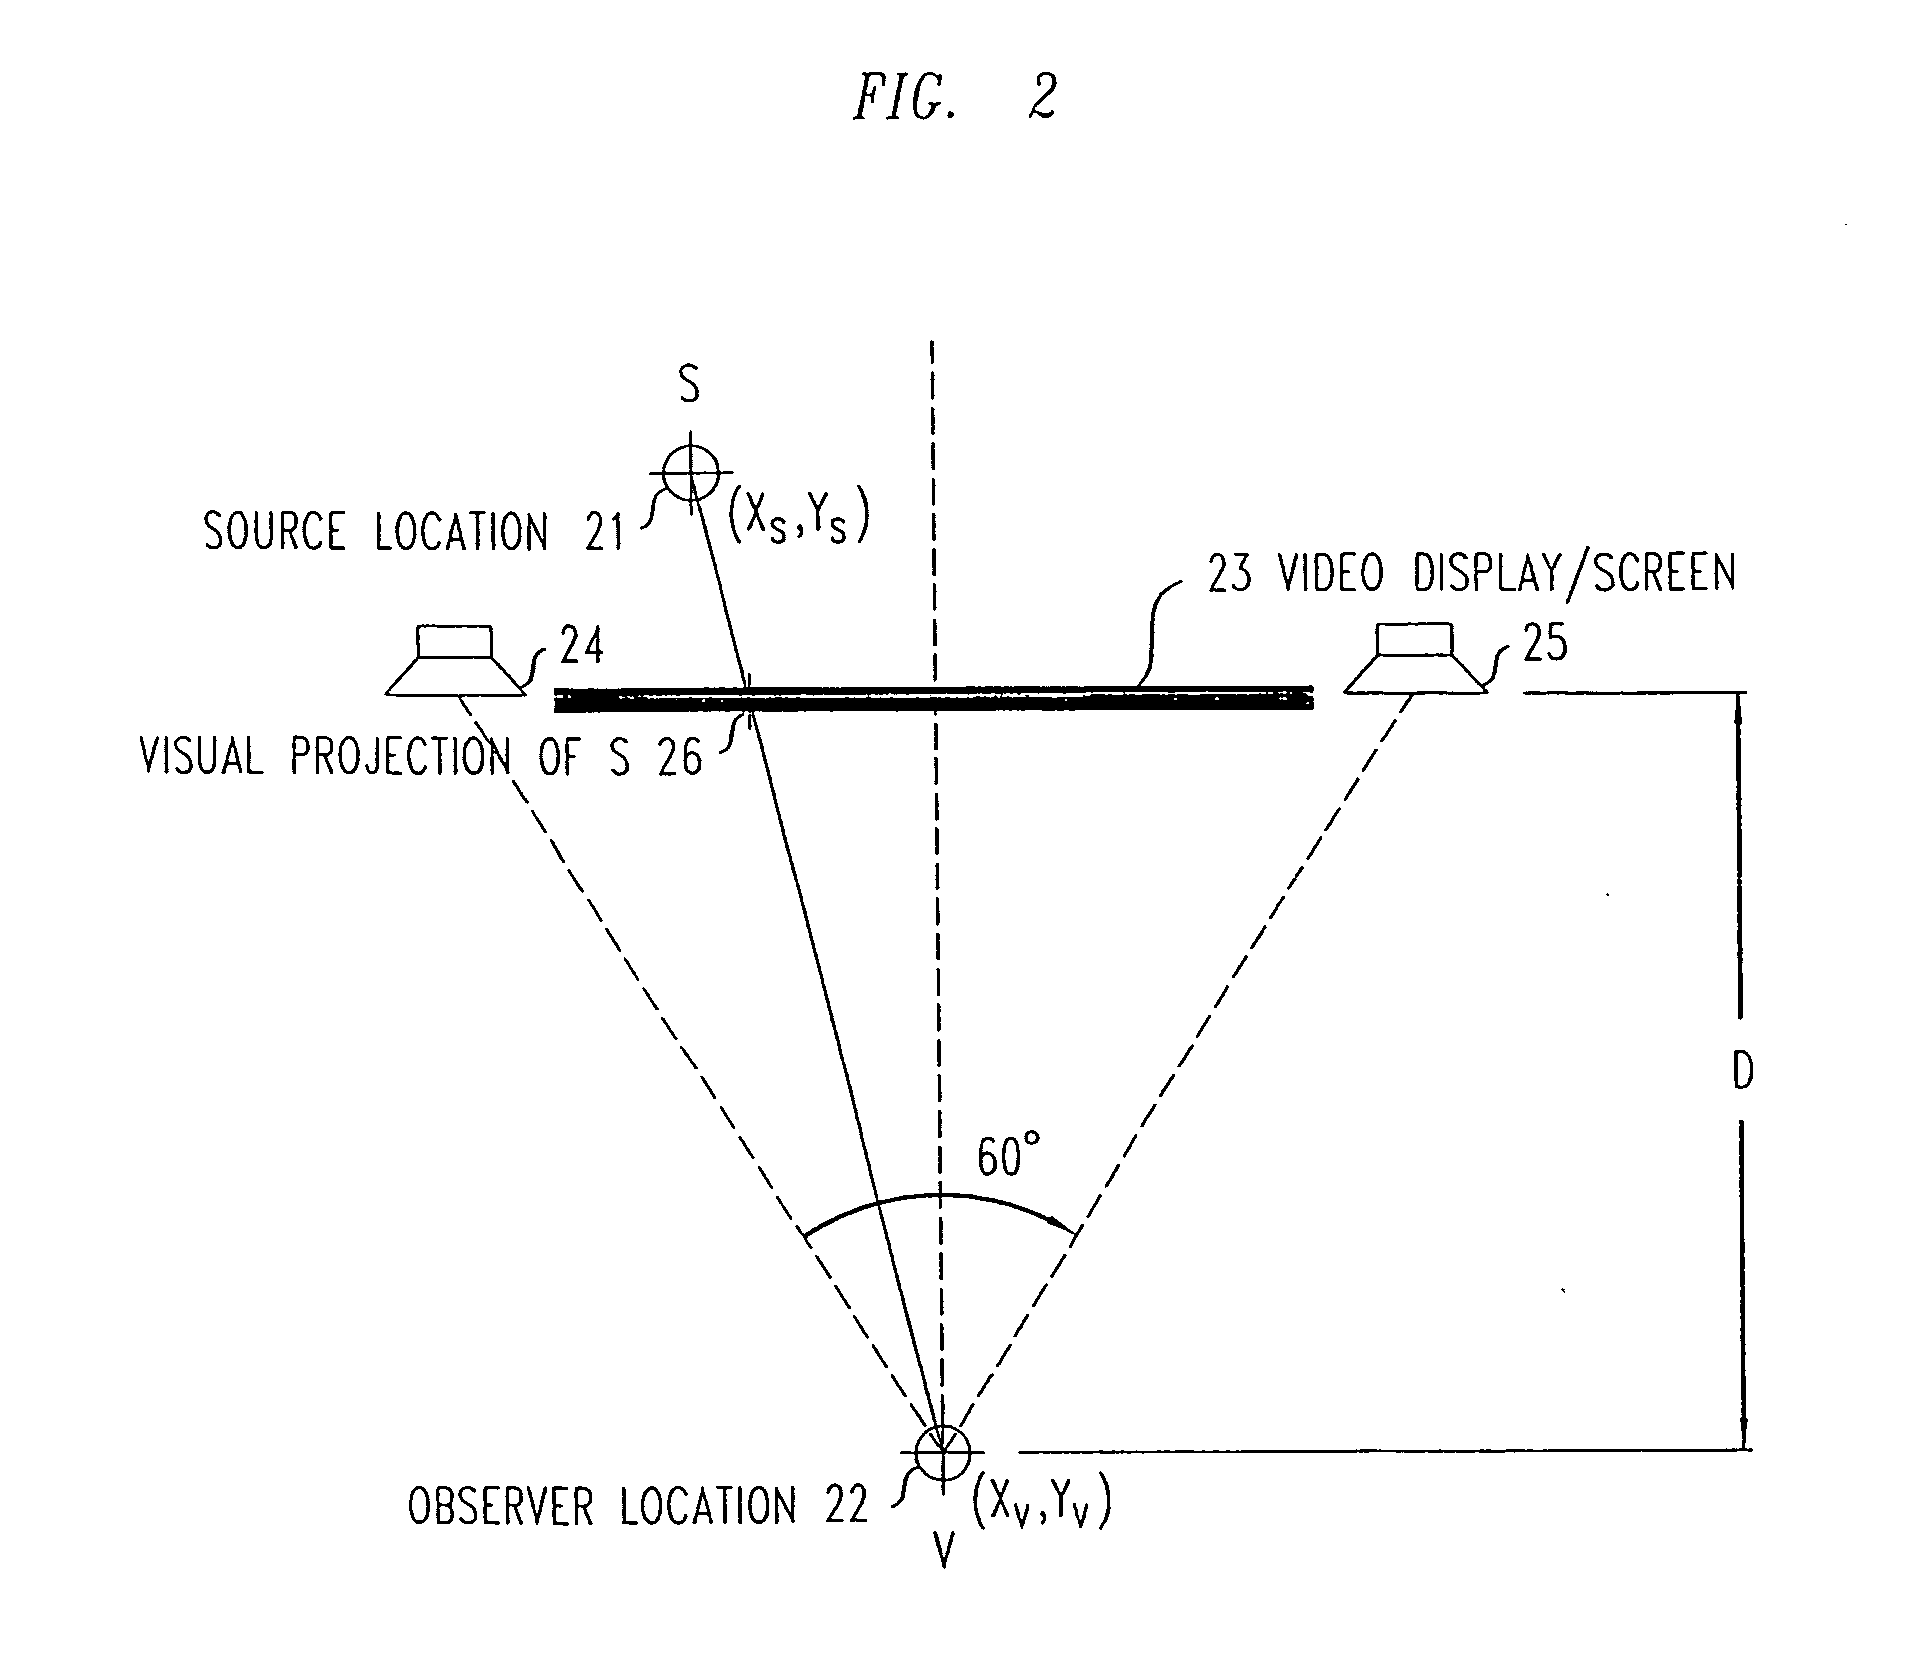 Method and apparatus for improved mactching of auditory space to visual space in video teleconferencing applications using window-based displays